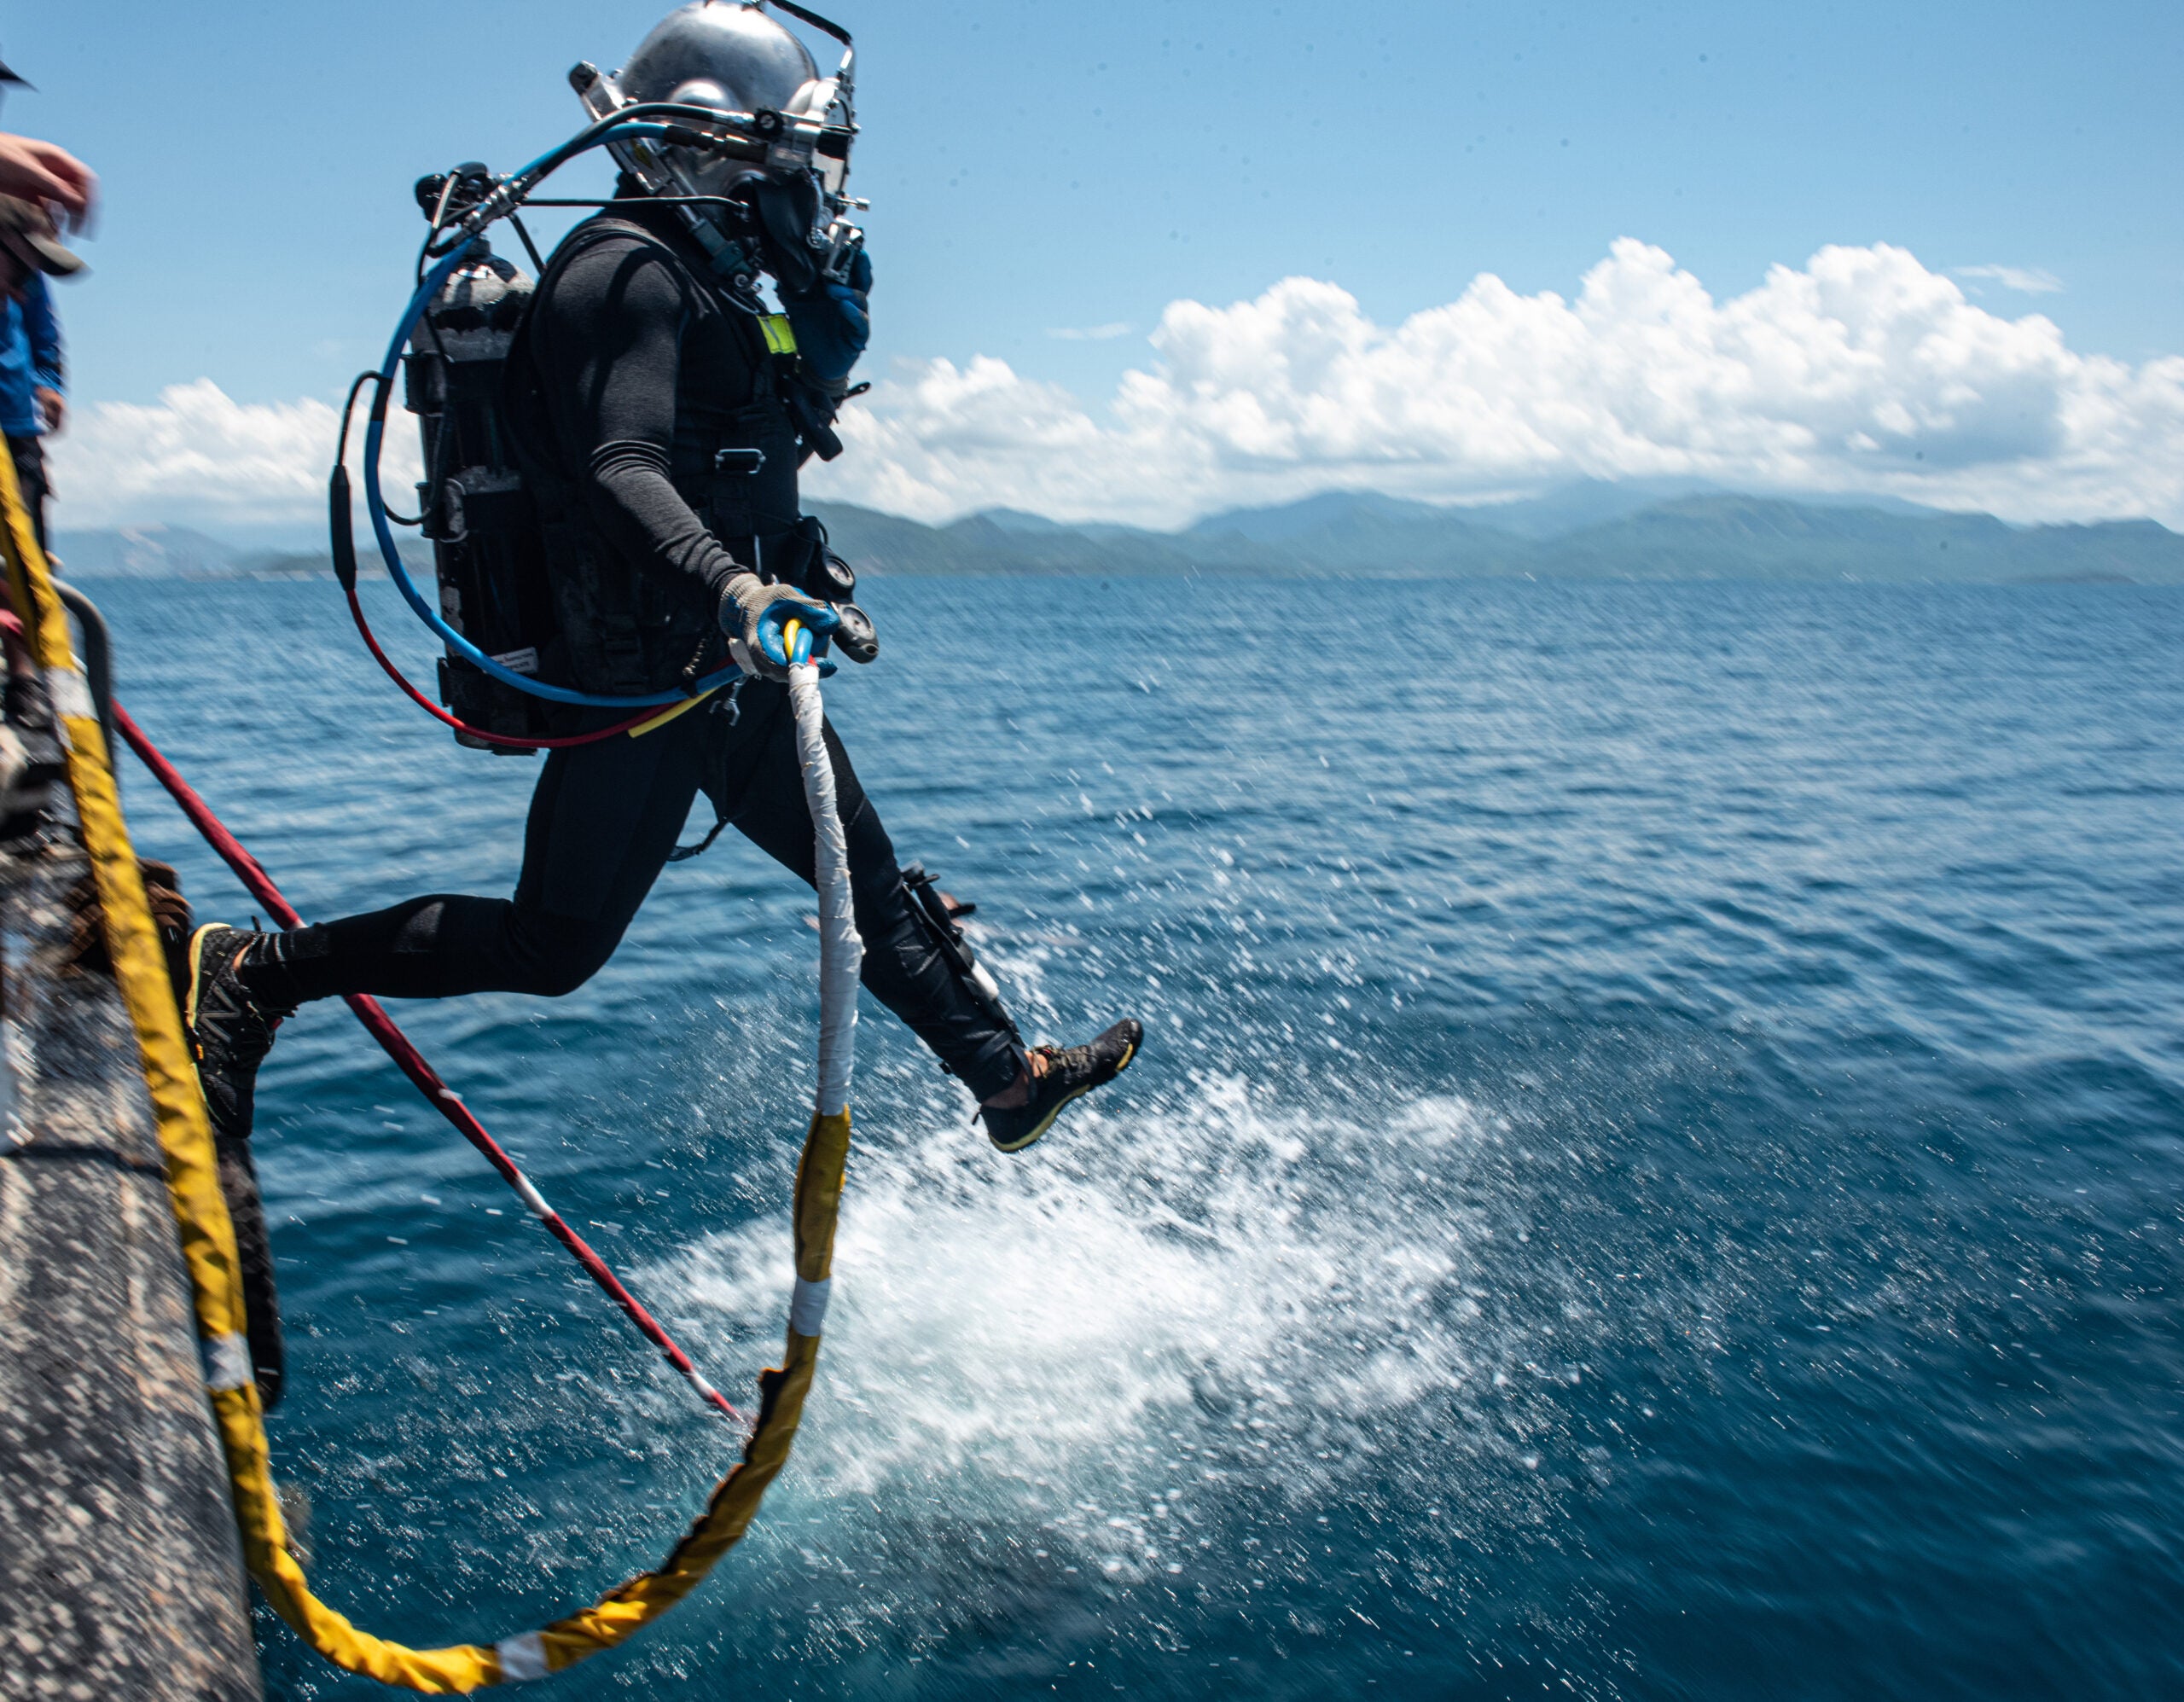 U.S. Army Sgt. Marc Falcon, 7th Engineer Dive Detachment salvage diver, enters the water off of a barge during a Defense POW/MIA Accounting Agency (DPAA) recovery mission in Nha Trang province, Vietnam, May 15, 2021. Falcon is one of the many divers that DPAA entrusts to go below the surface of the ocean and search for the remains of service members from past conflicts. DPAA’s mission is to achieve the fullest possible accounting for missing and unaccounted U.S. personnel to their families and the nation.  (U.S. Army photo by Sgt. Mitchell Ryan)